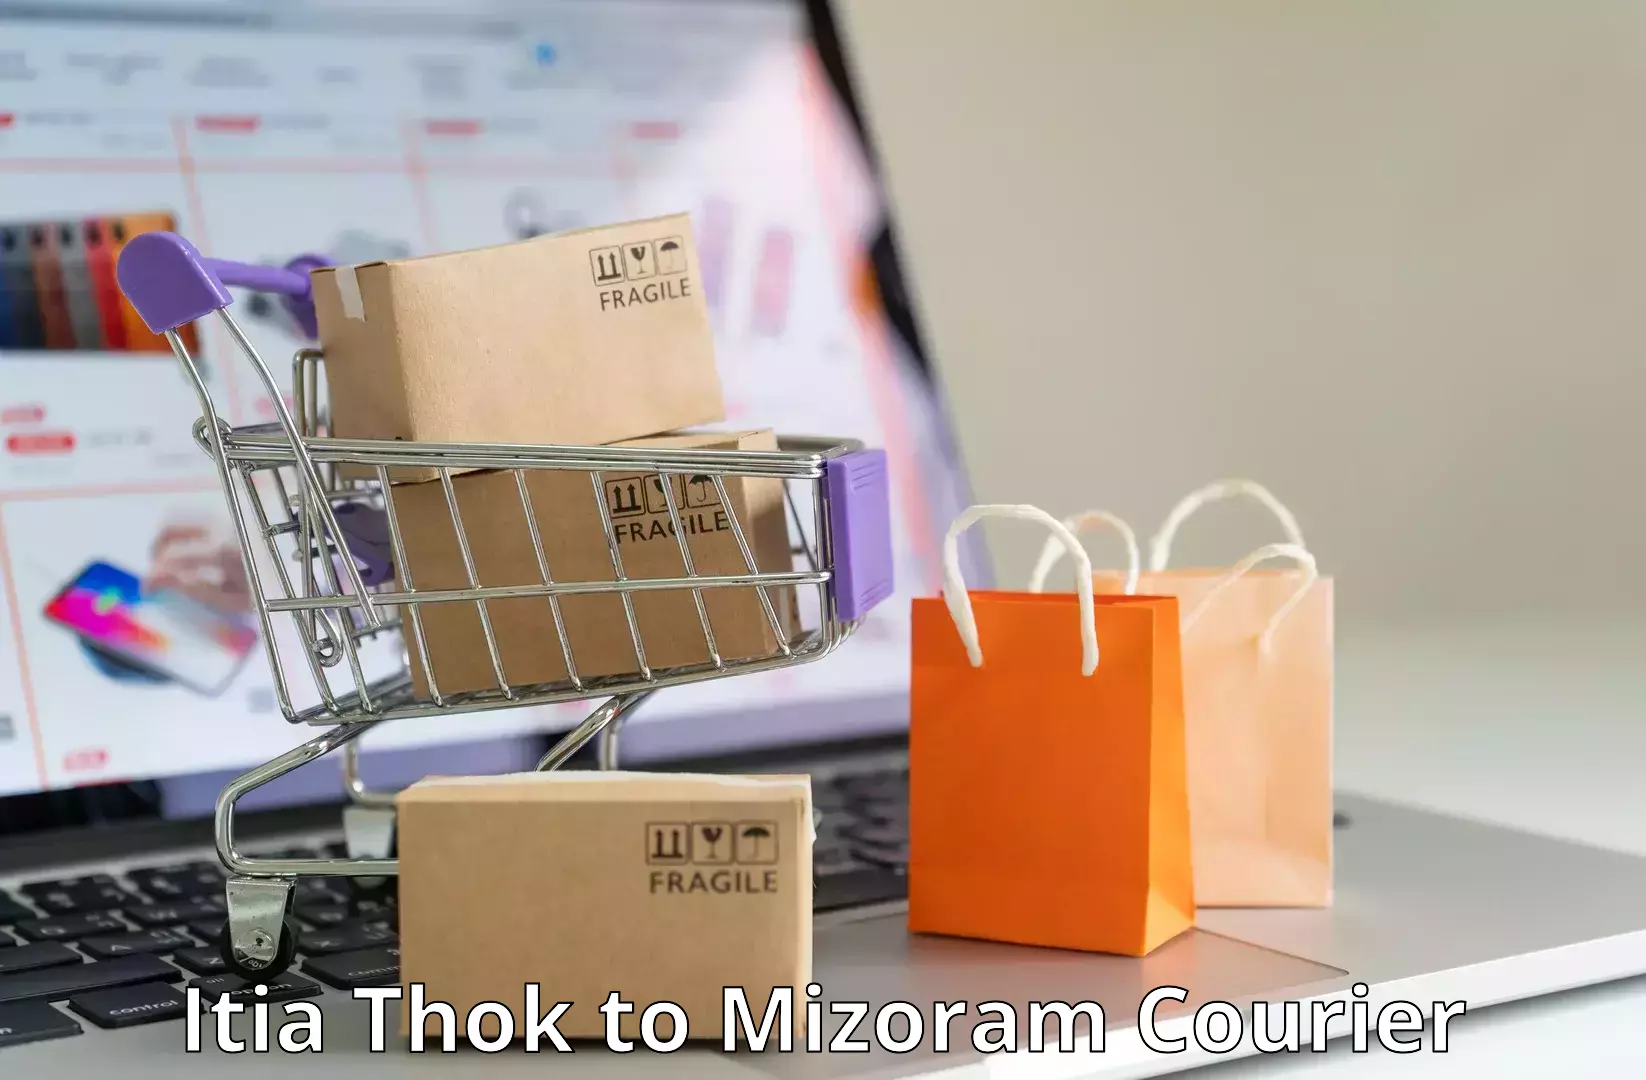 Cost-effective shipping solutions Itia Thok to Aizawl